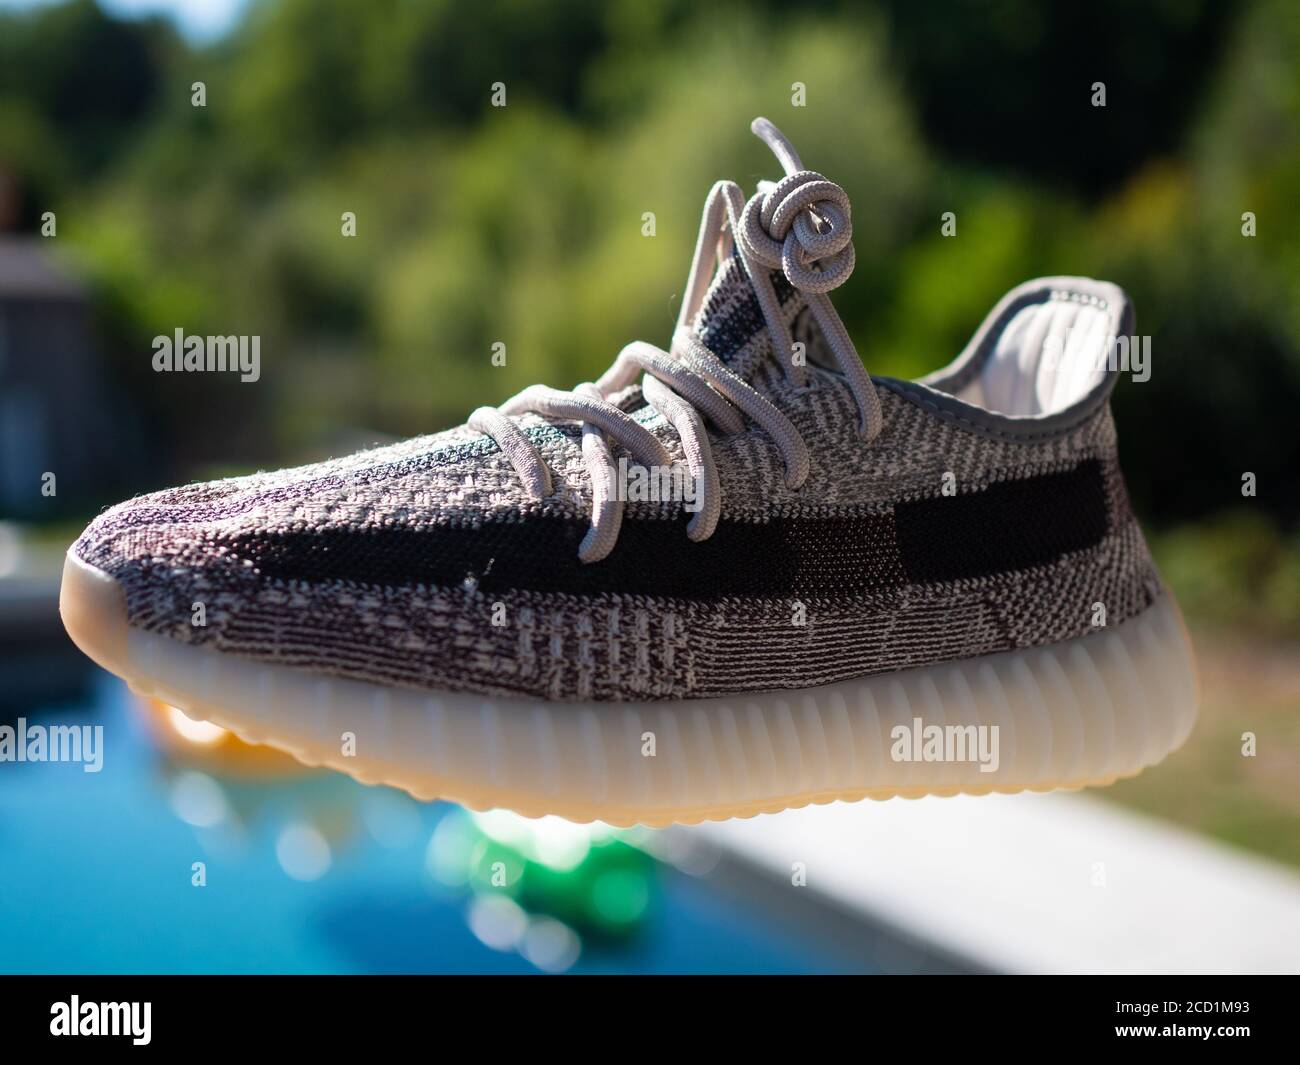 adidas yeezy boost august